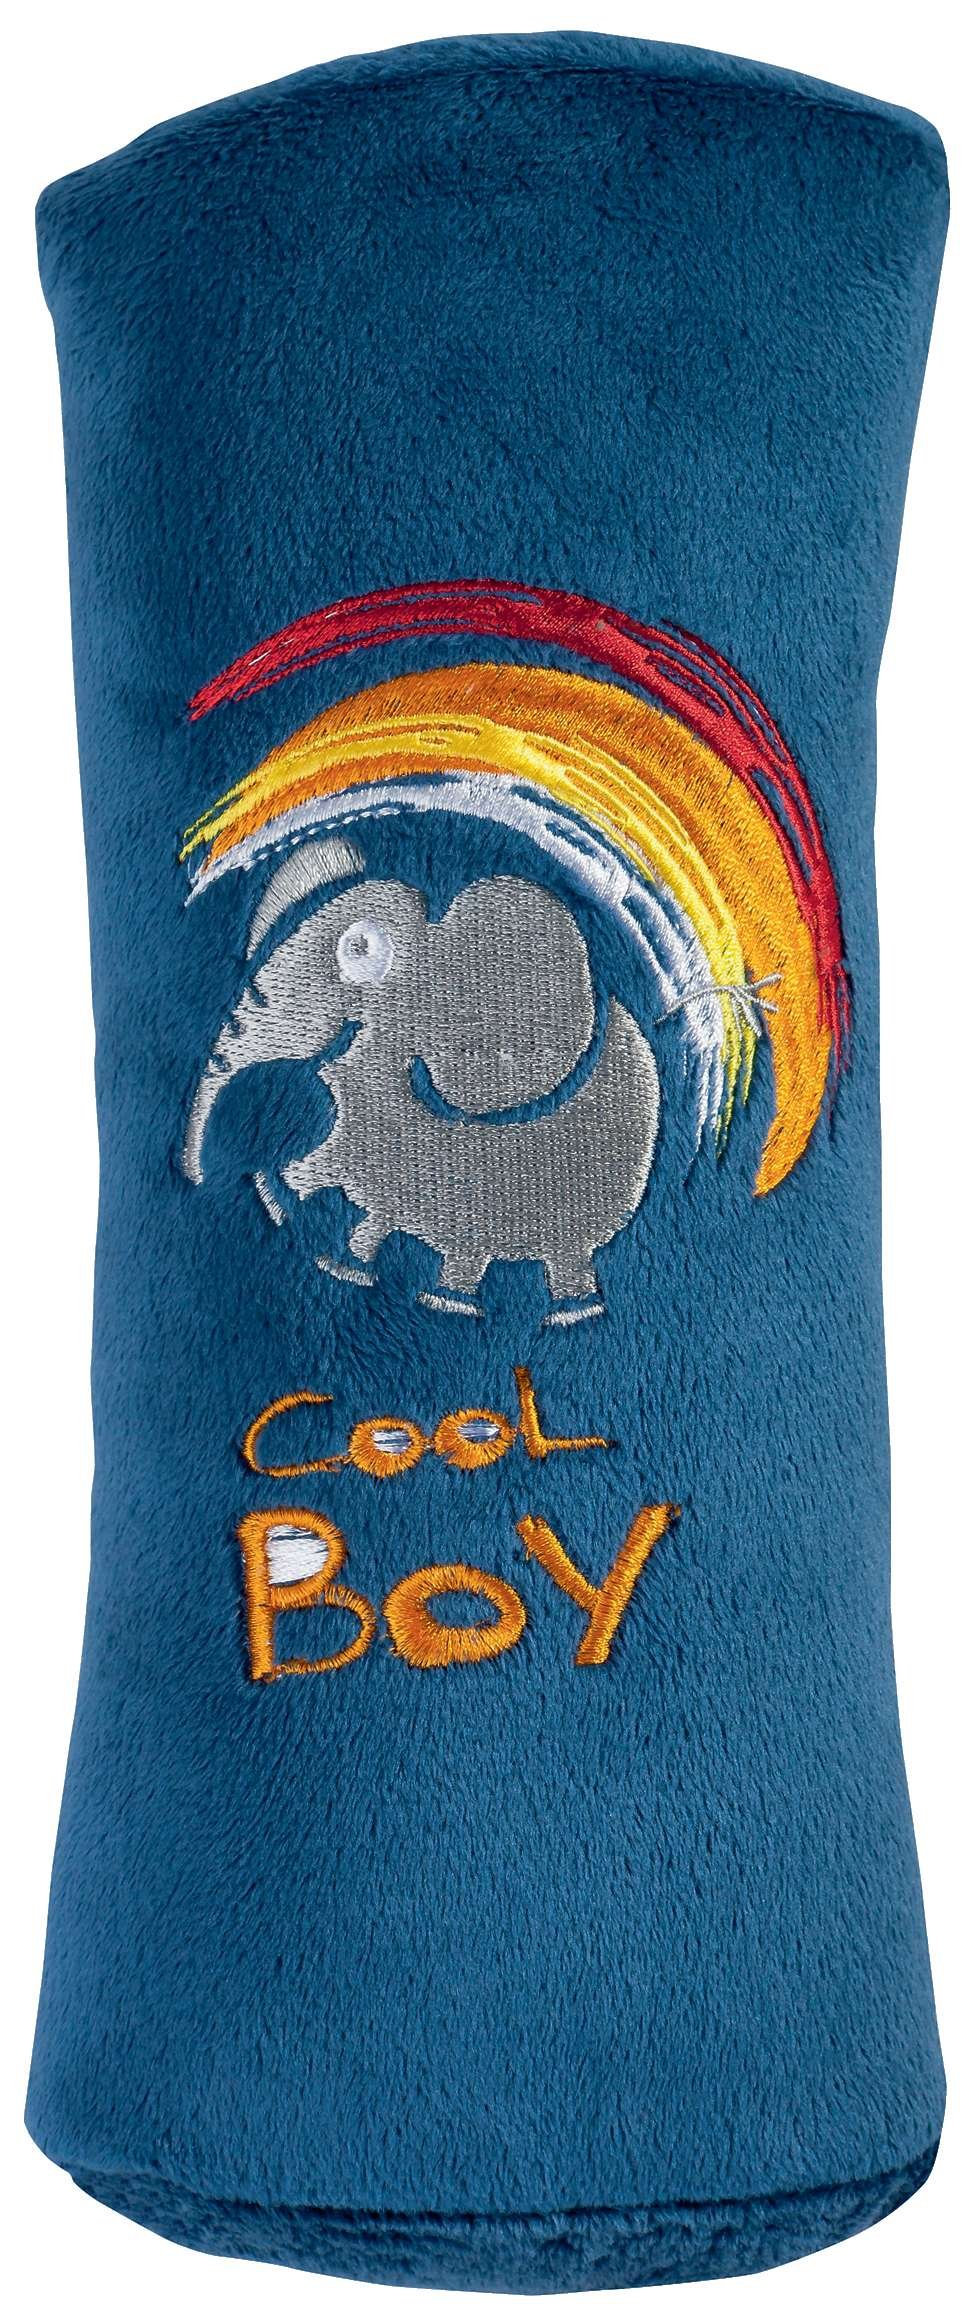 Sleeping pillow Cool Boy blue from 5 years